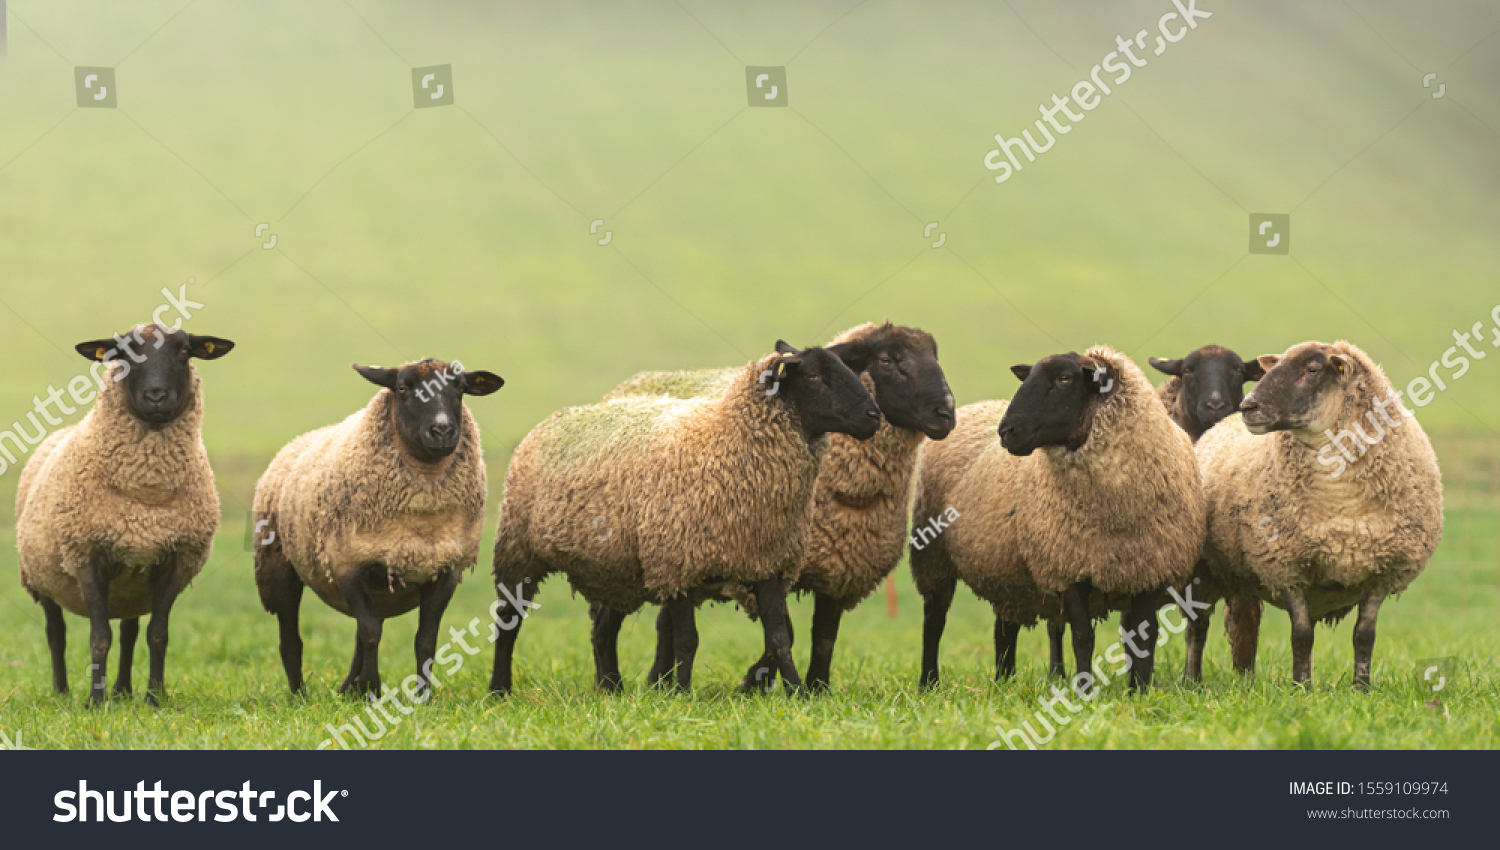 a group of sheep on a pasture stand next to each other and look into the camera #1559109974